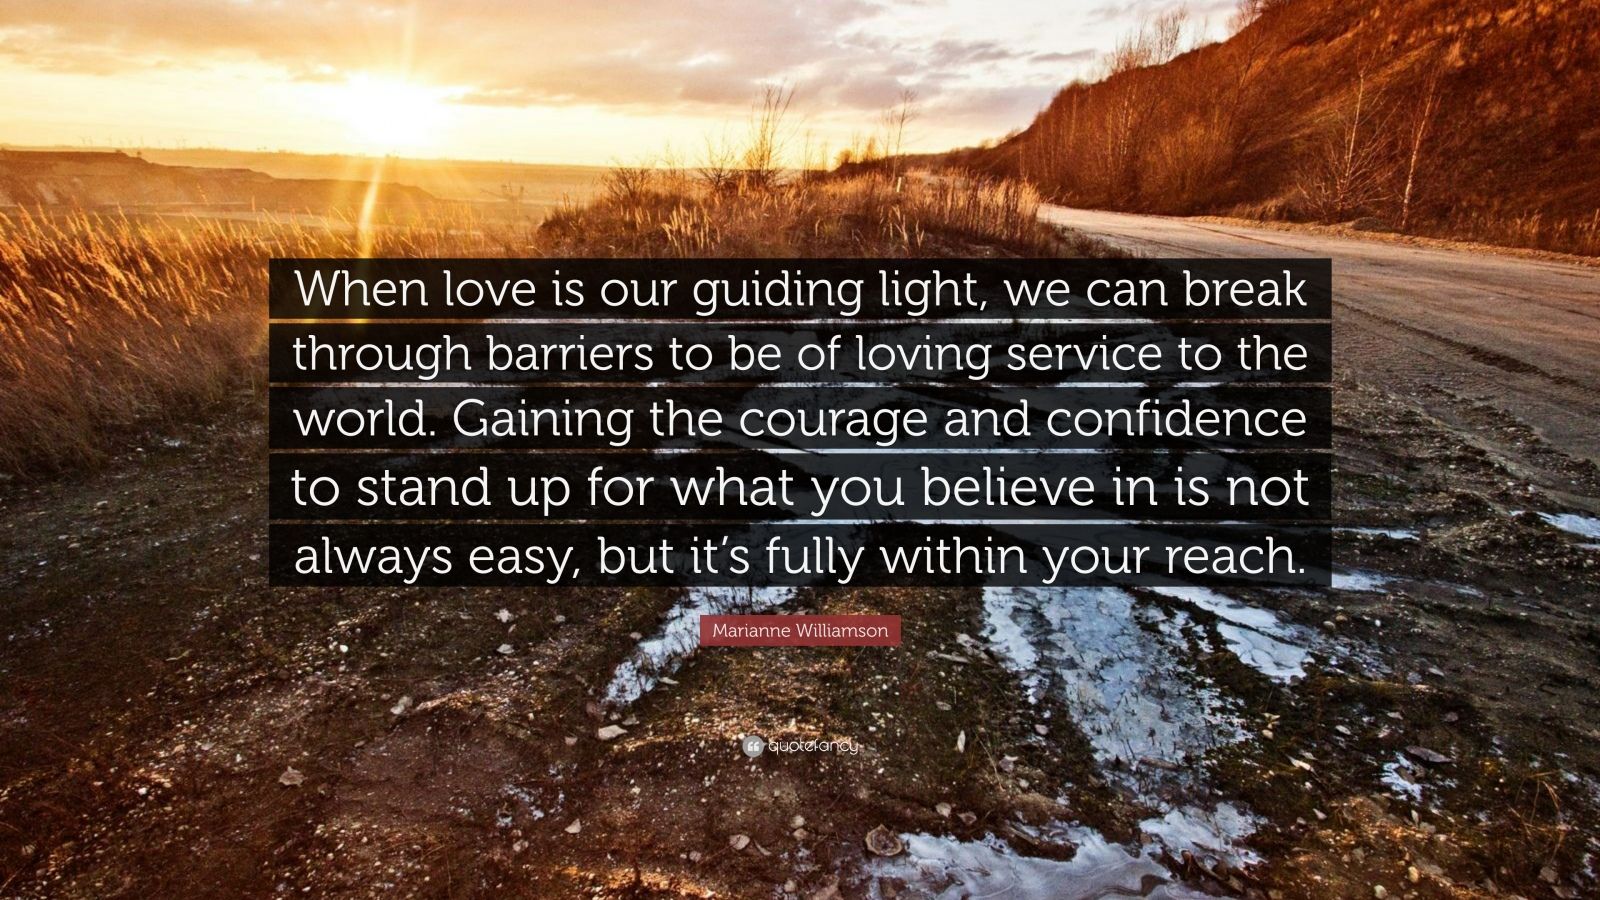 Marianne Williamson Quote: “When love is our guiding light, we can